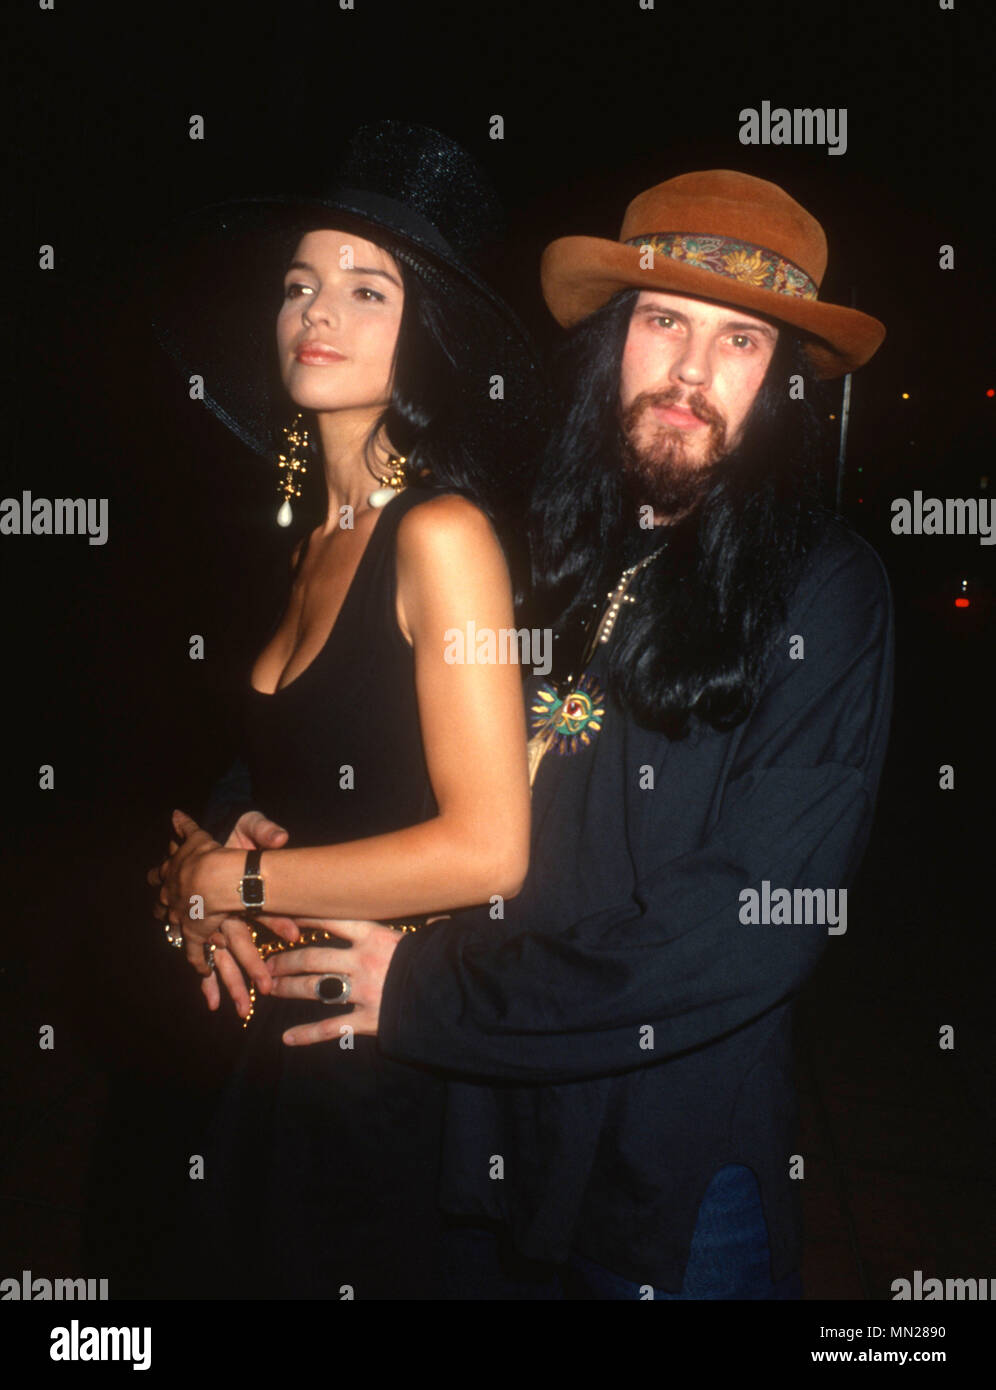 LOS ANGELES, CA - JULY 26: (L-R) Heatherlyn Campbell and musician/singer Ian Astbury of The Cult attend Was (Not Was) Band's concert at Club Mayan on July 26, 1990 in Los Angeles, California. Photo by Barry King/Alamy Stock Photo Stock Photo